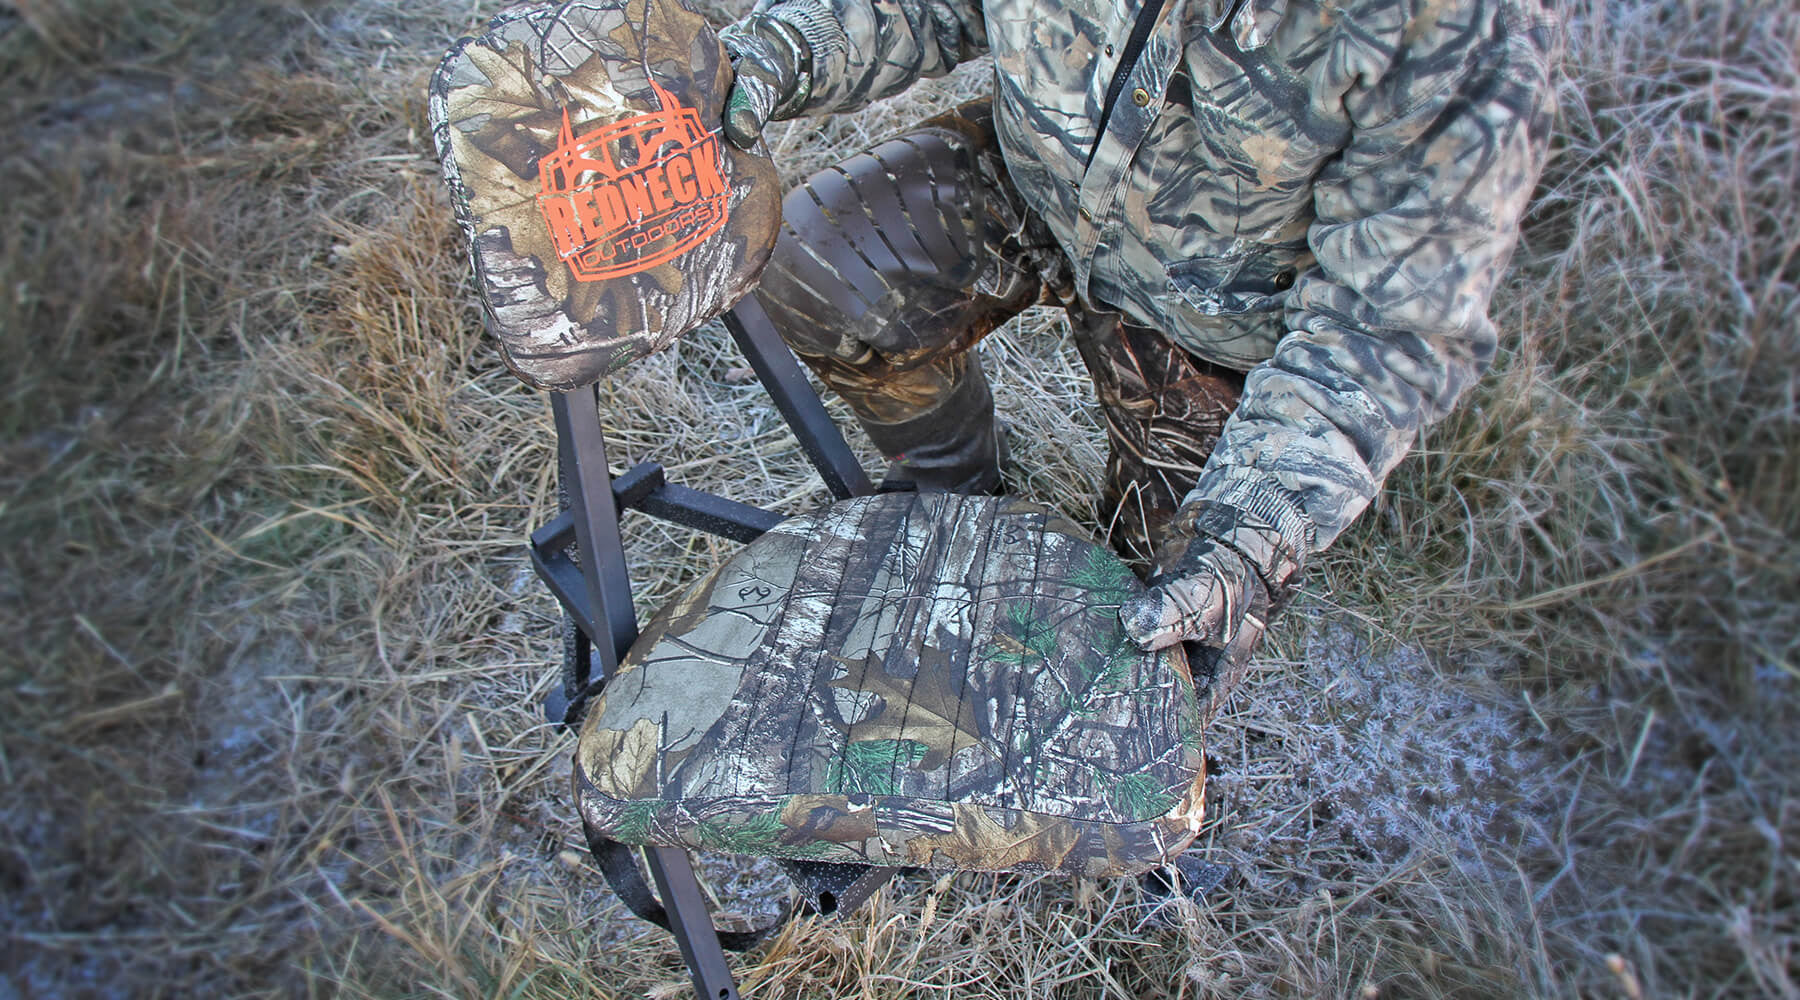 The Redneck Portable Hunting Chair